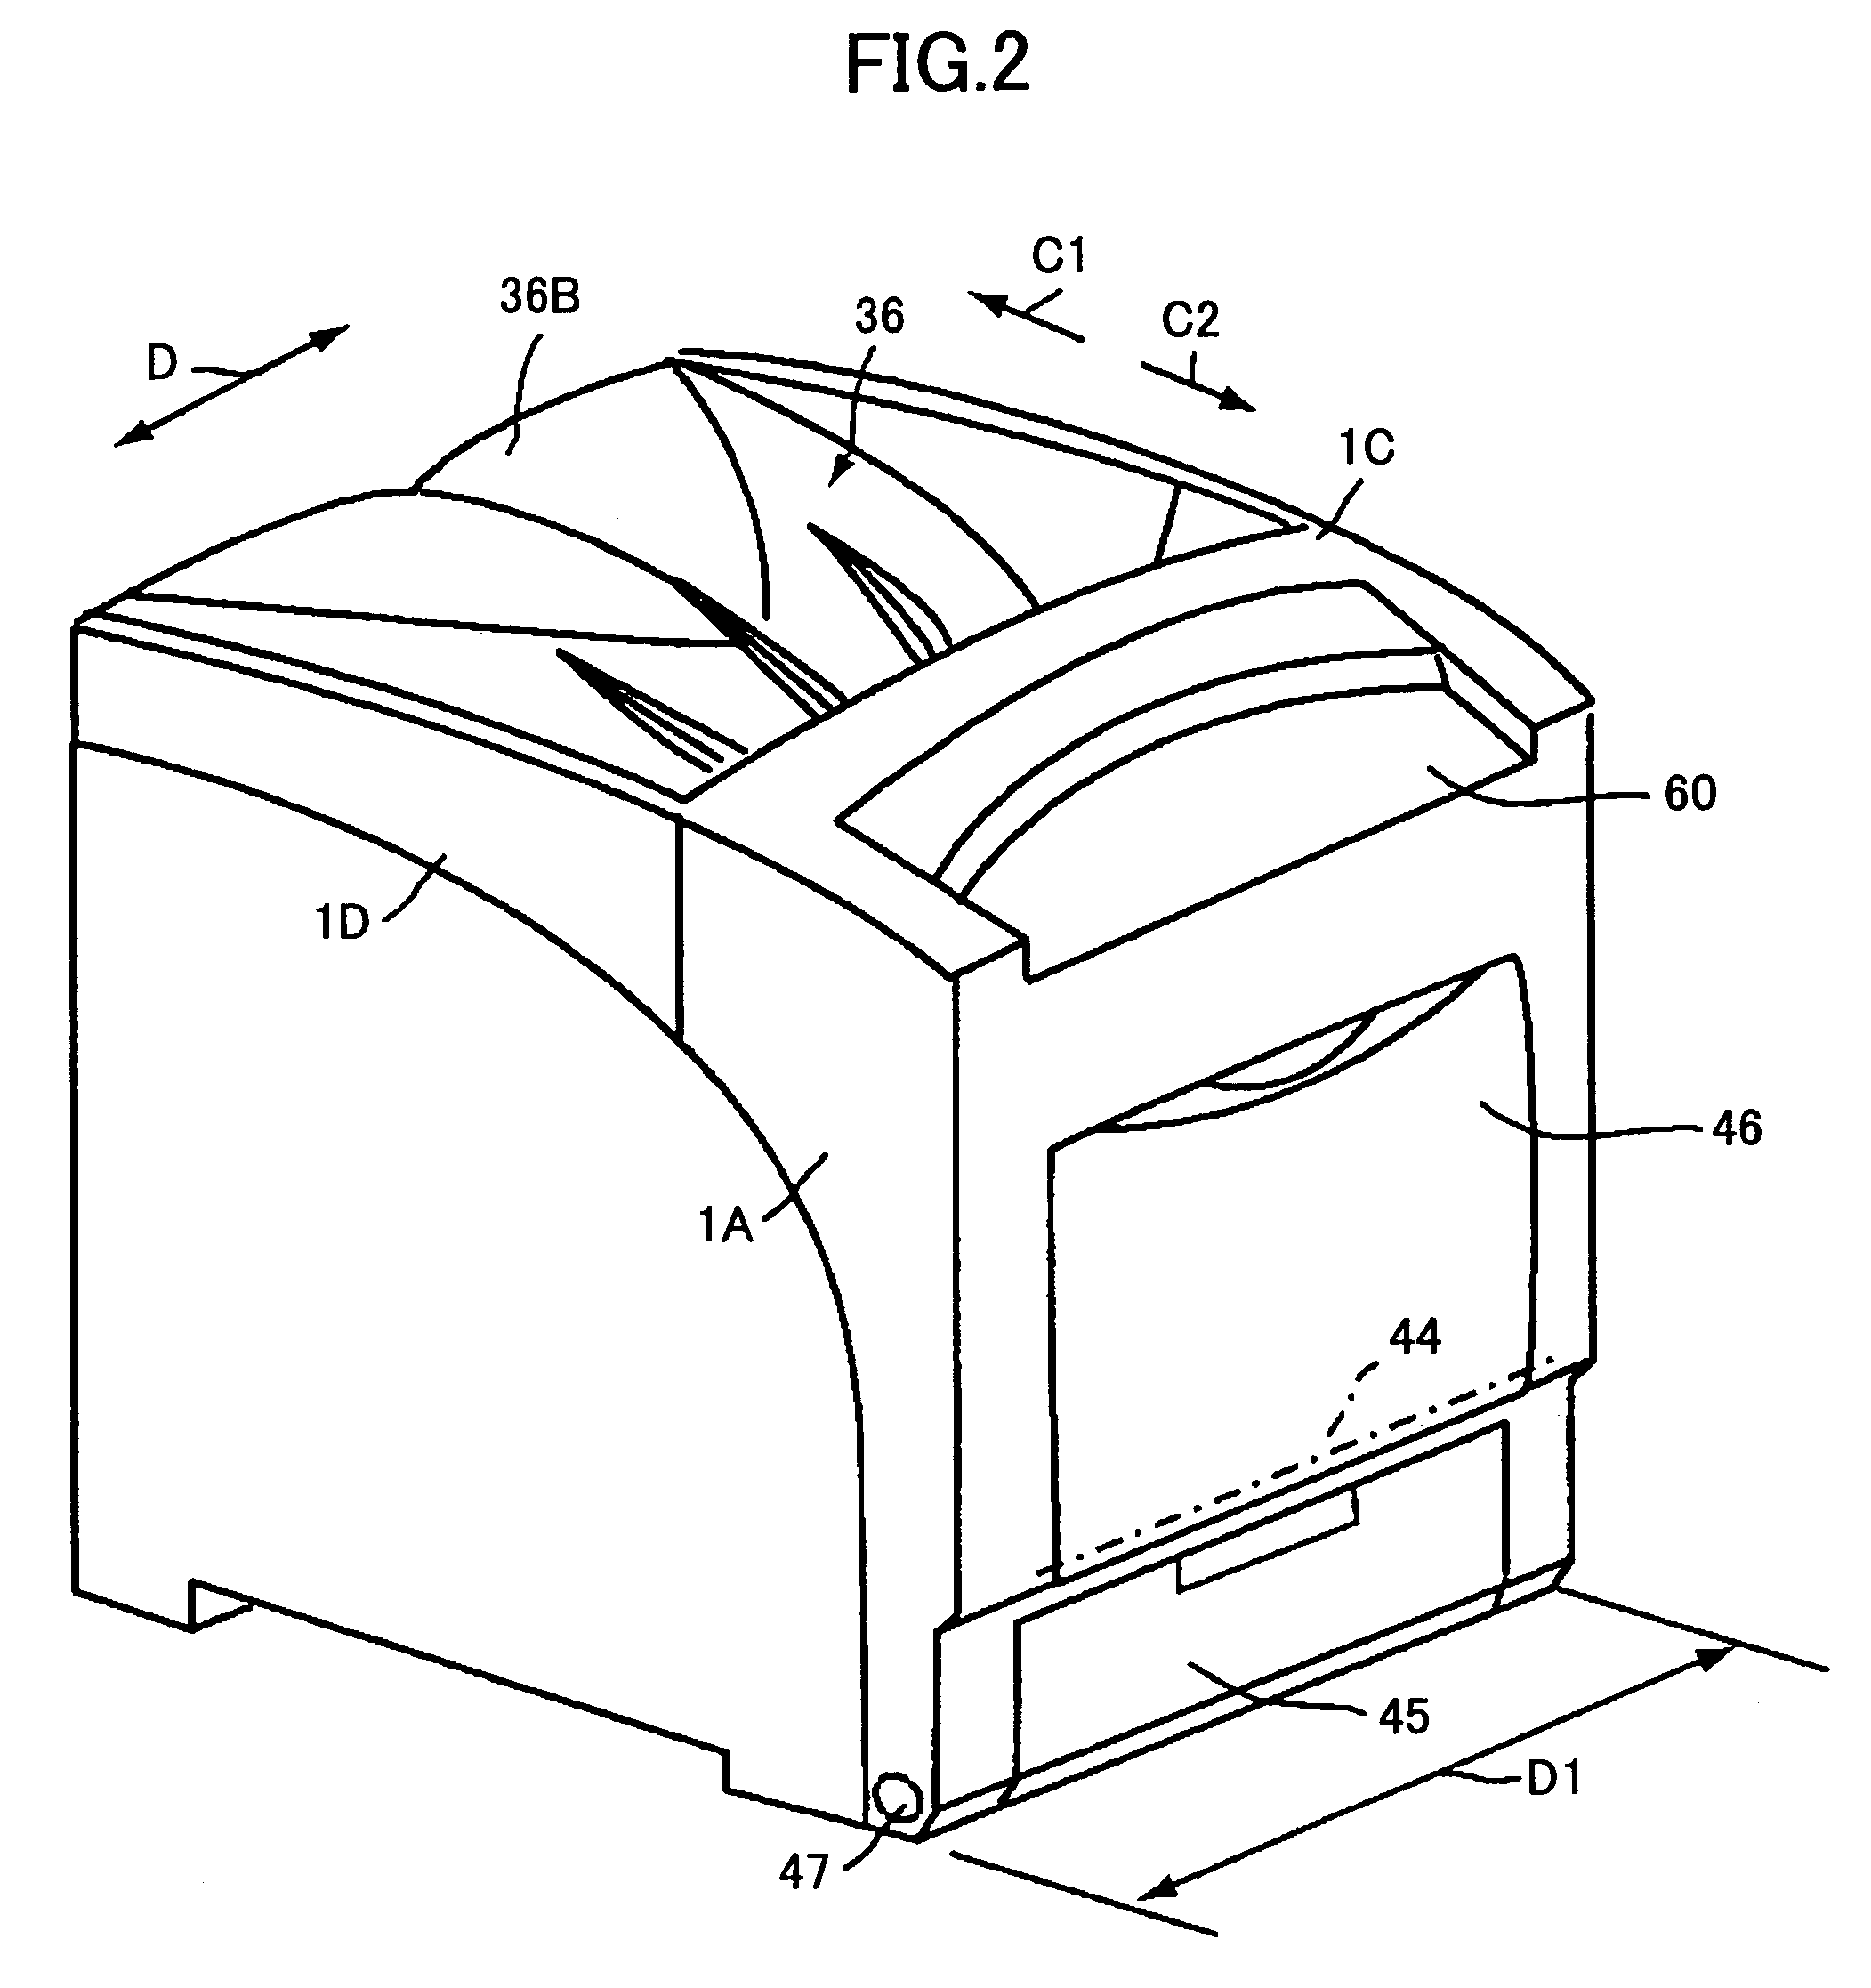 Image forming apparatus with discharging unit of increased capacity